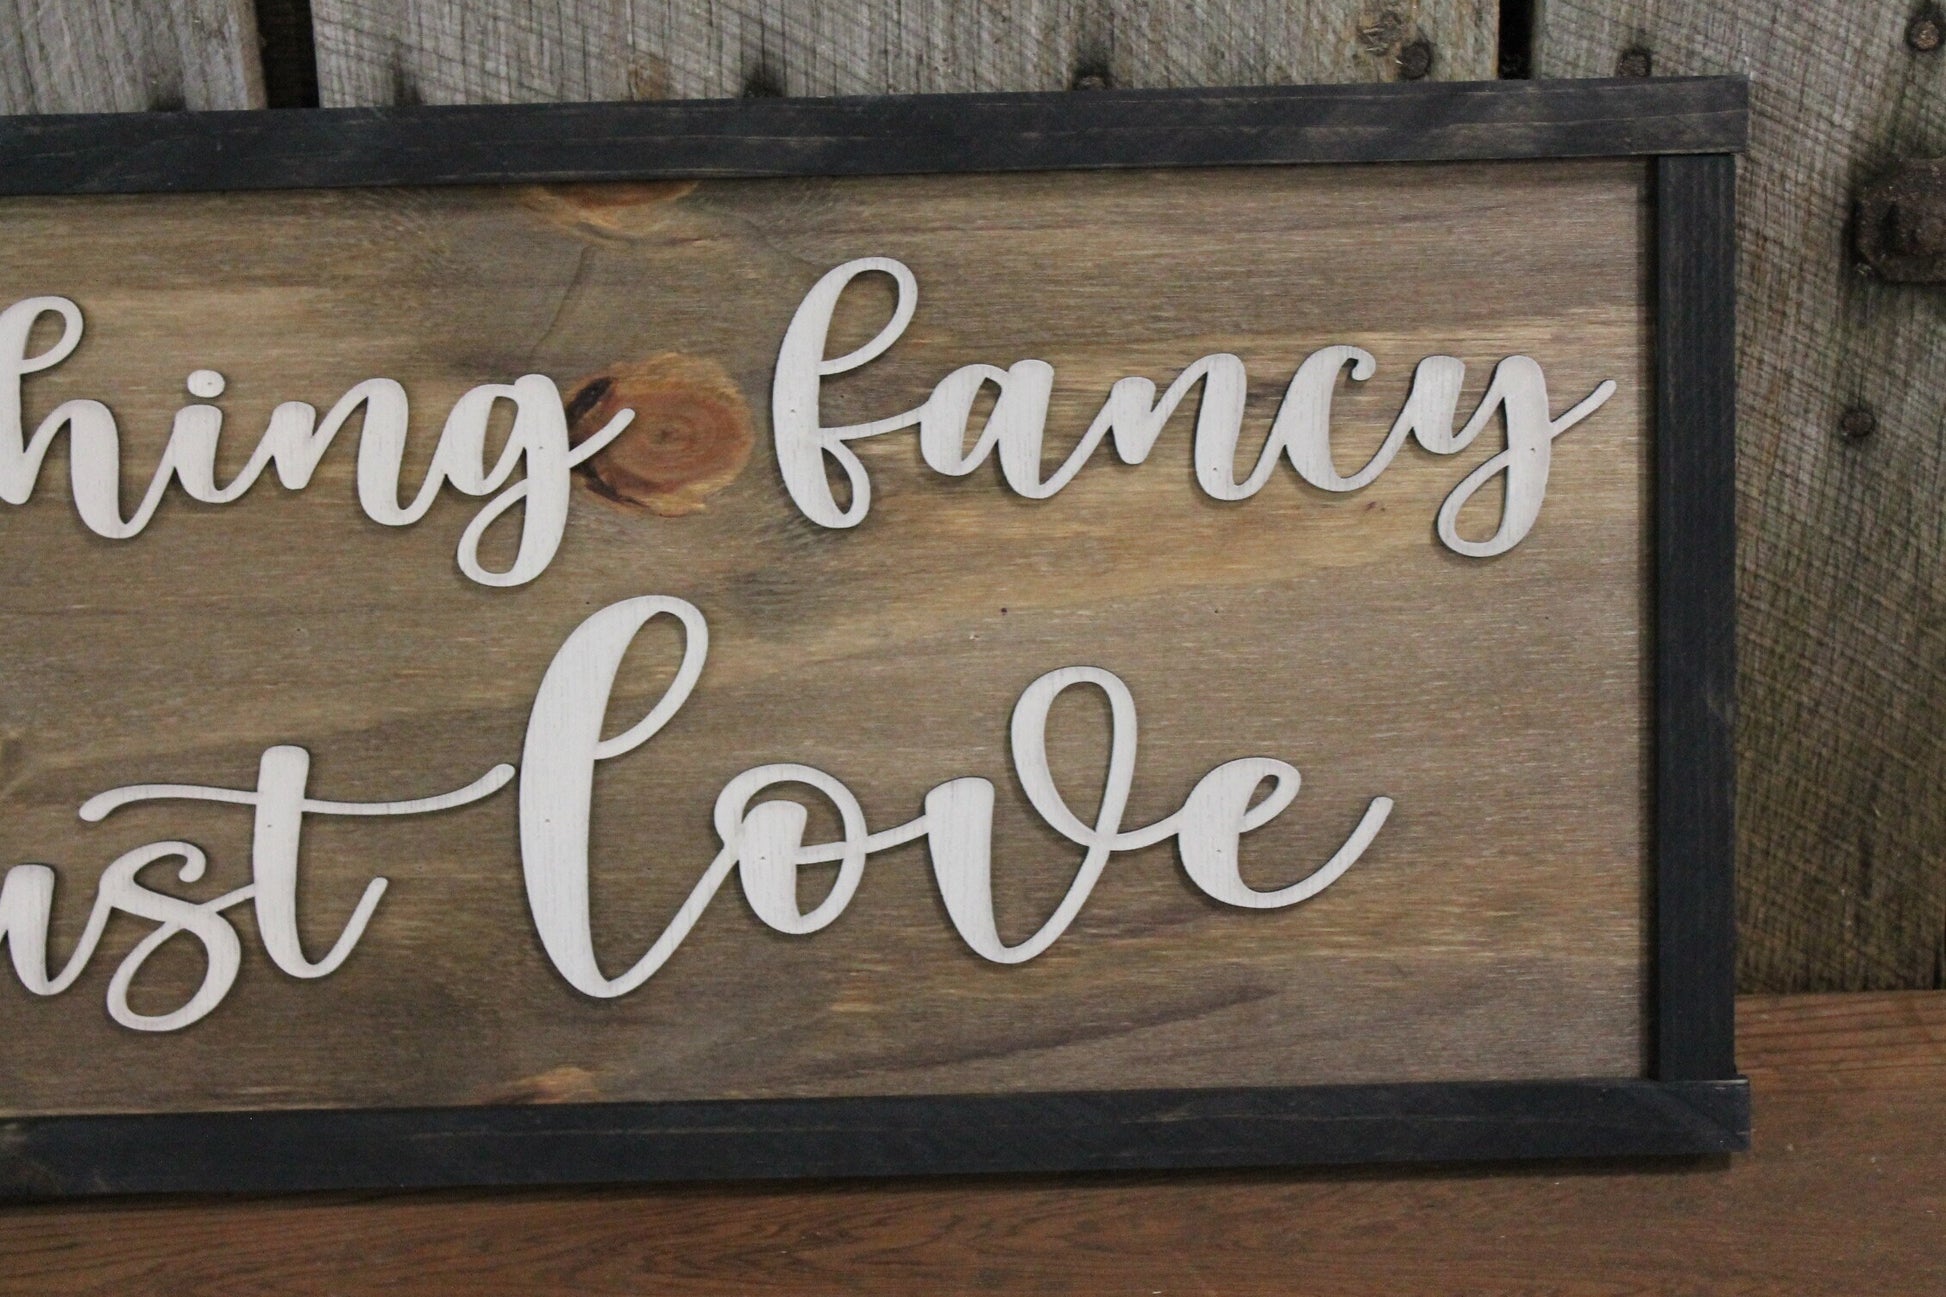 County Wedding Nothing Fancy Just Love Raised Text Wedding Sign Party 3D Large Framed Rustic Primitive Barn Wood